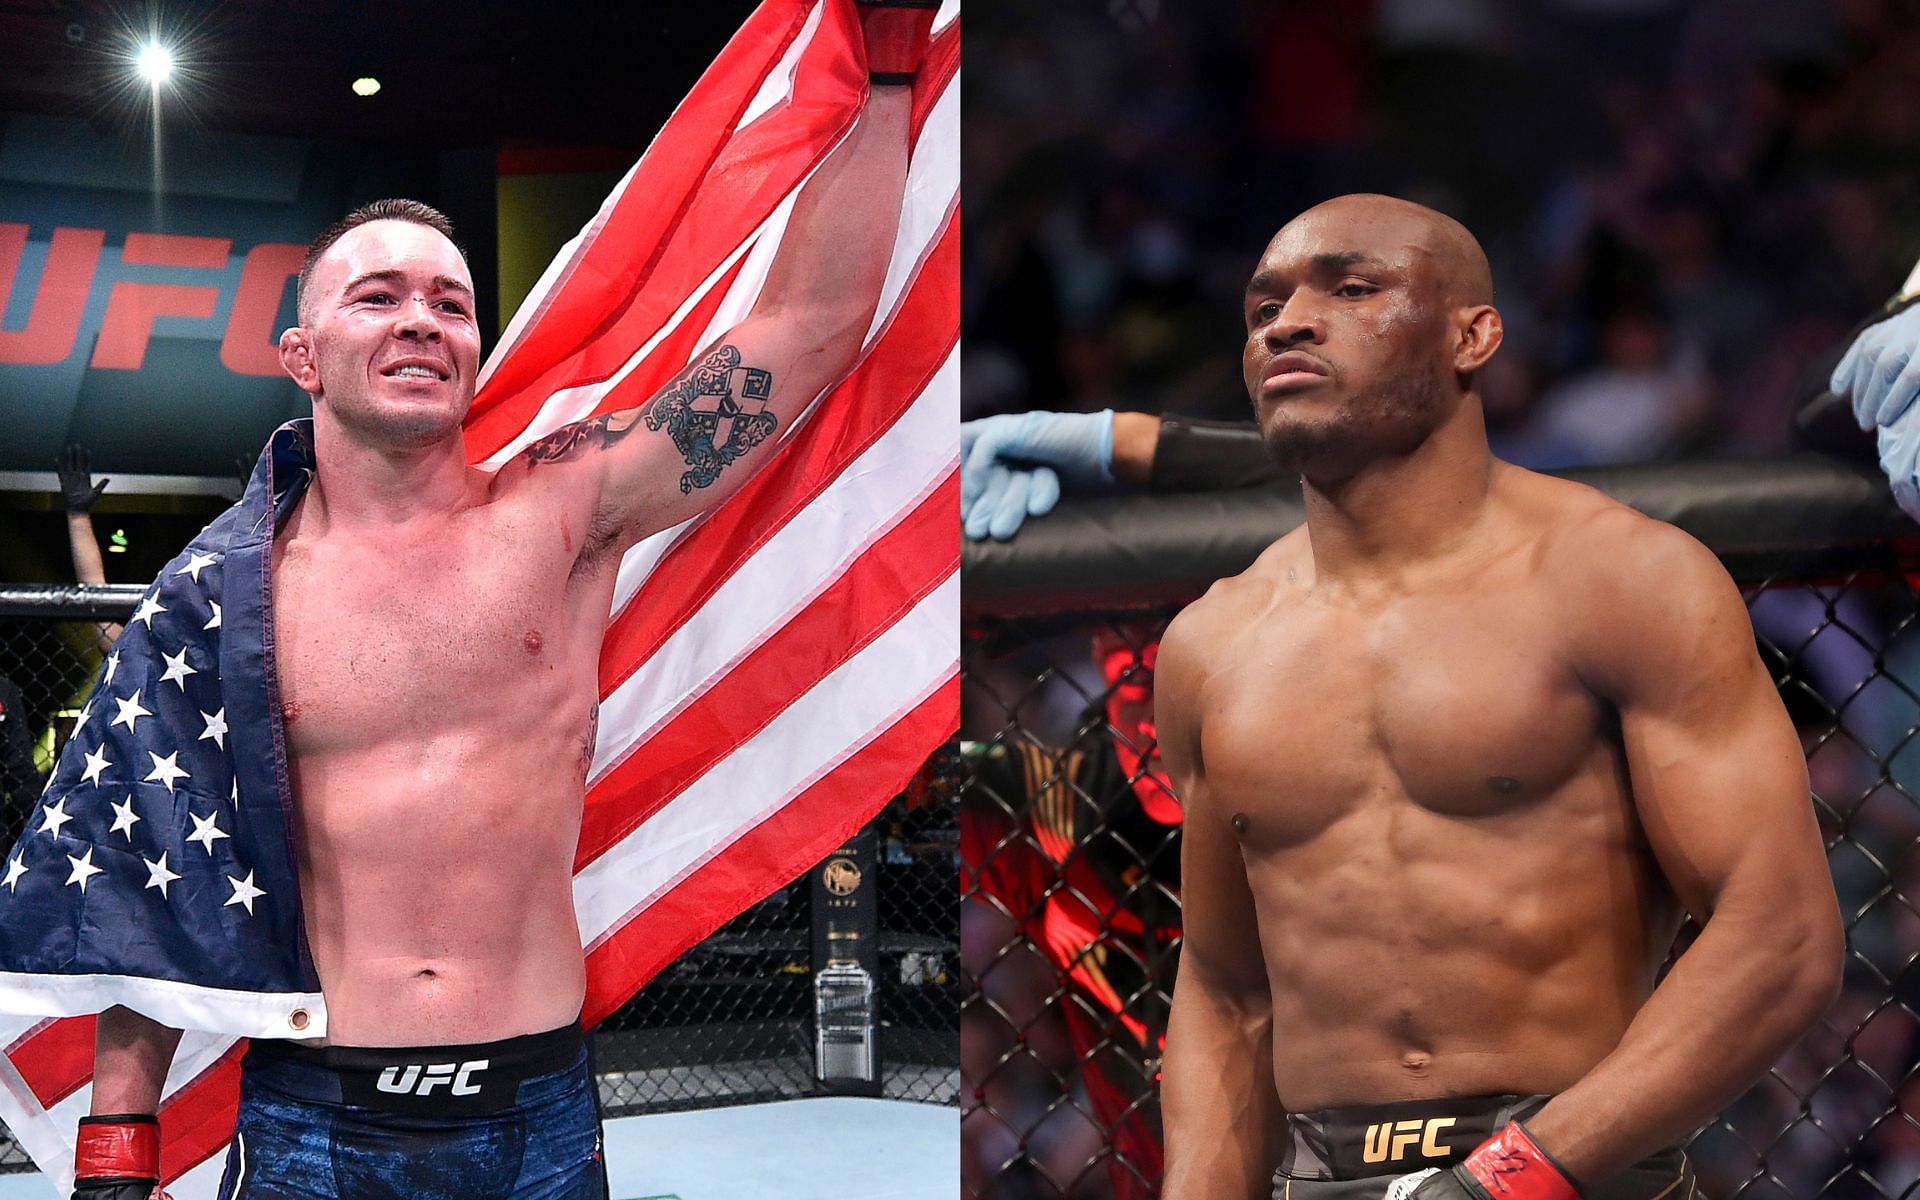 UFC 268 will see Kamaru Usman face Colby Covington in a welterweight title fight.